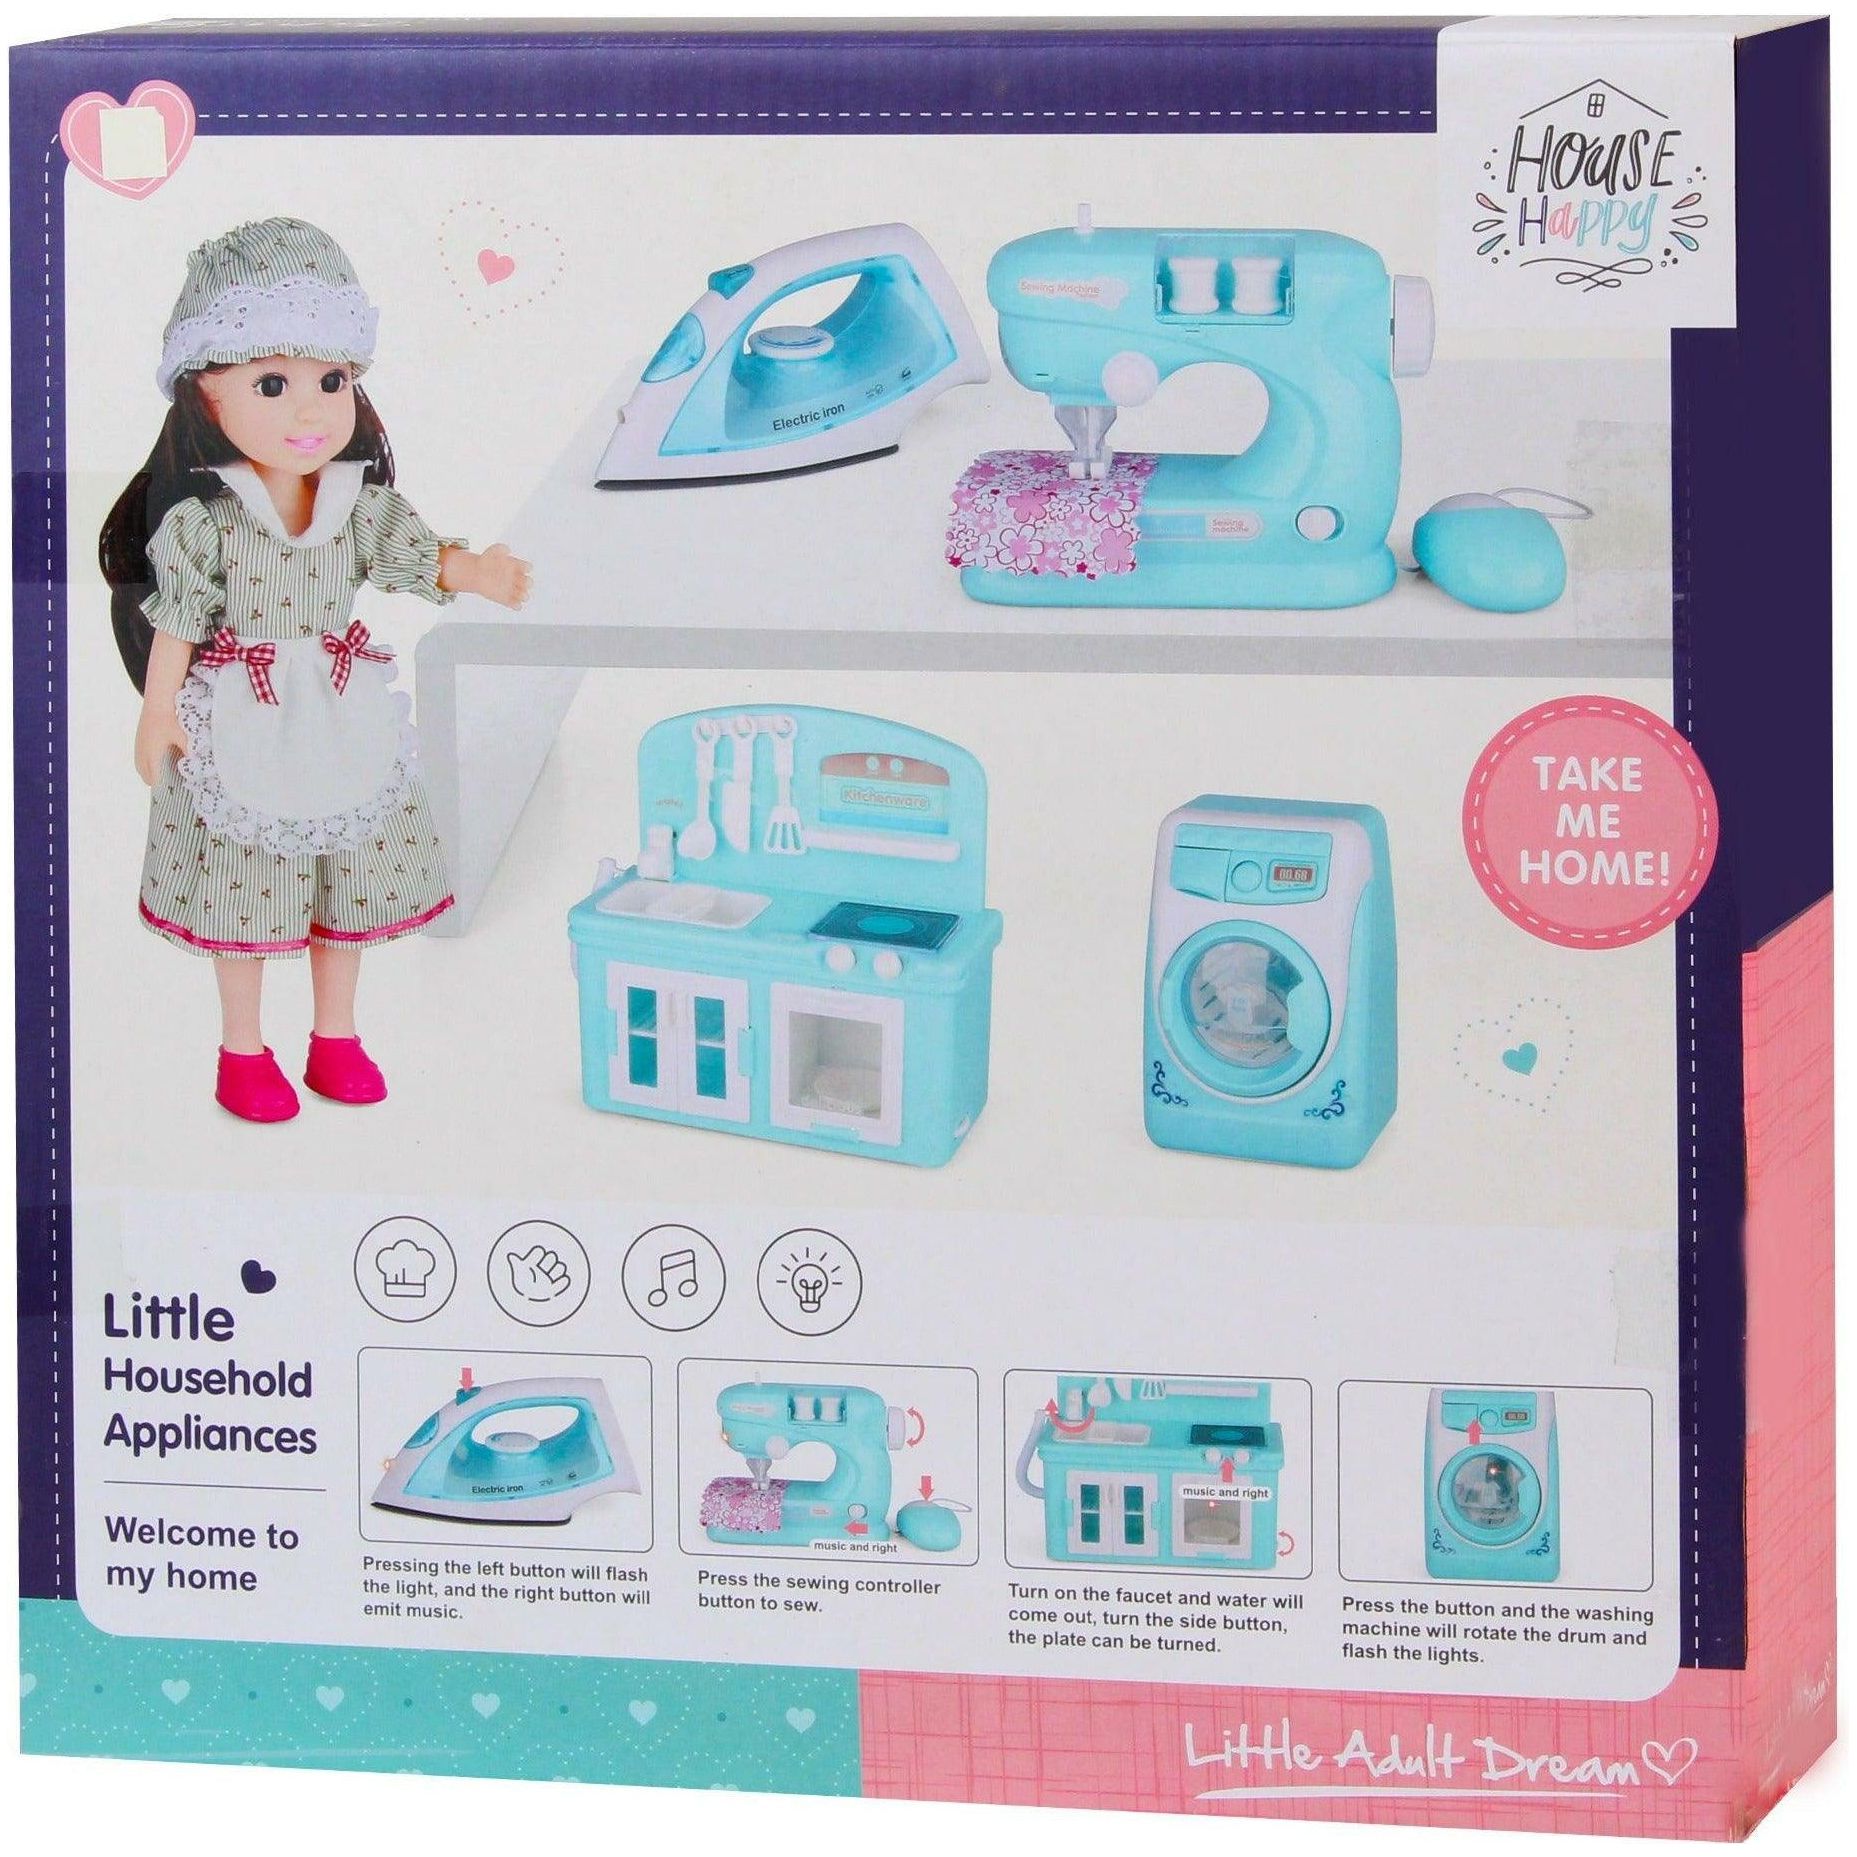 House Happy Doll Home Beautiful Girl With Electric Iron Appliances Set - BumbleToys - 5-7 Years, Fashion Dolls & Accessories, Girls, Toy House